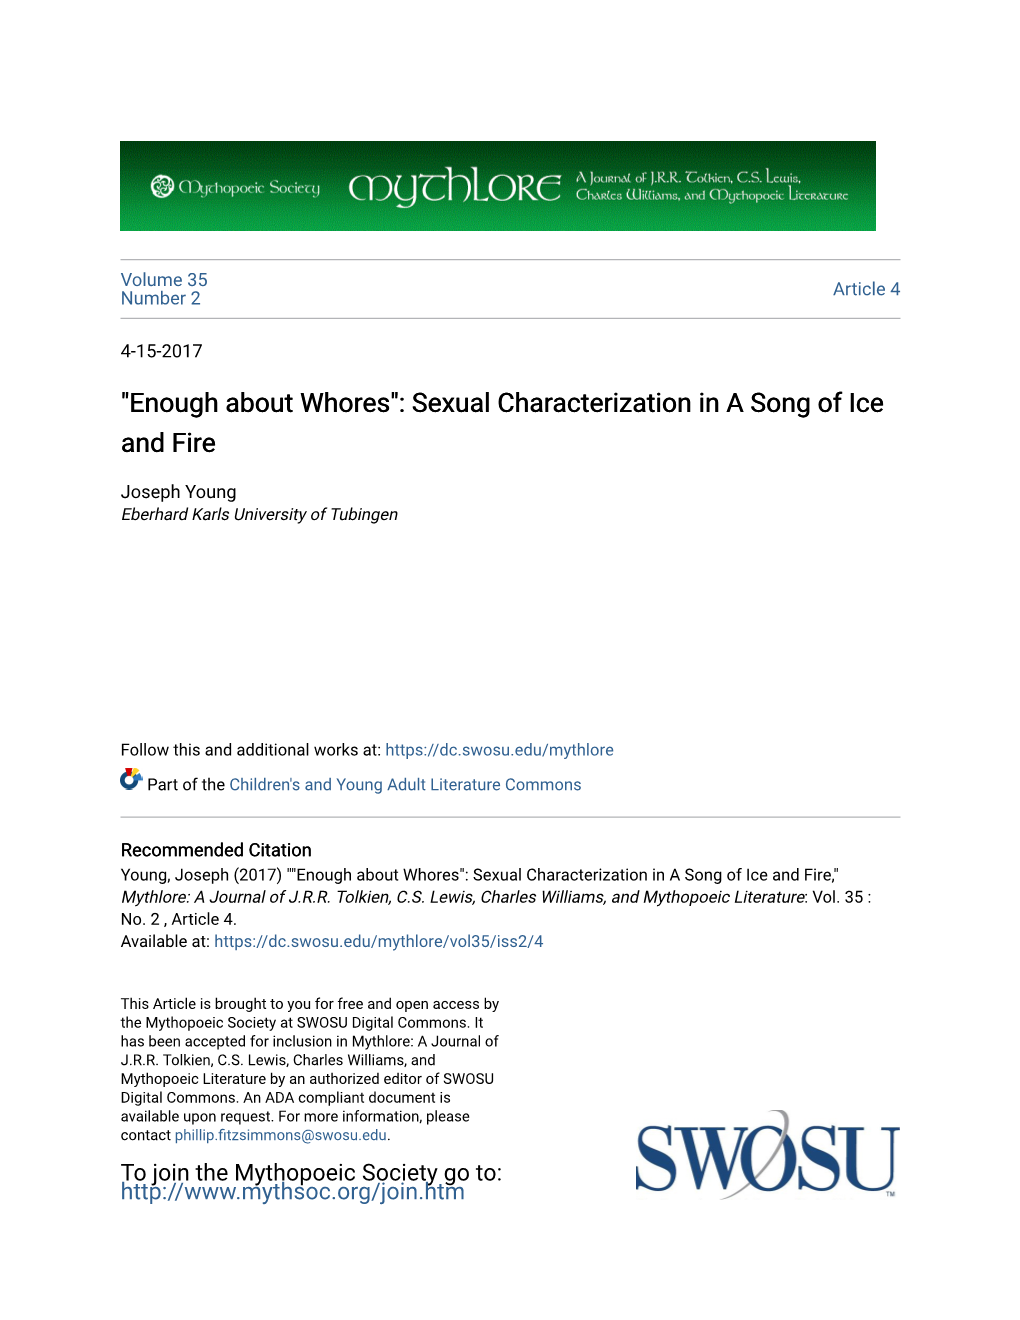 "Enough About Whores": Sexual Characterization in a Song of Ice and Fire